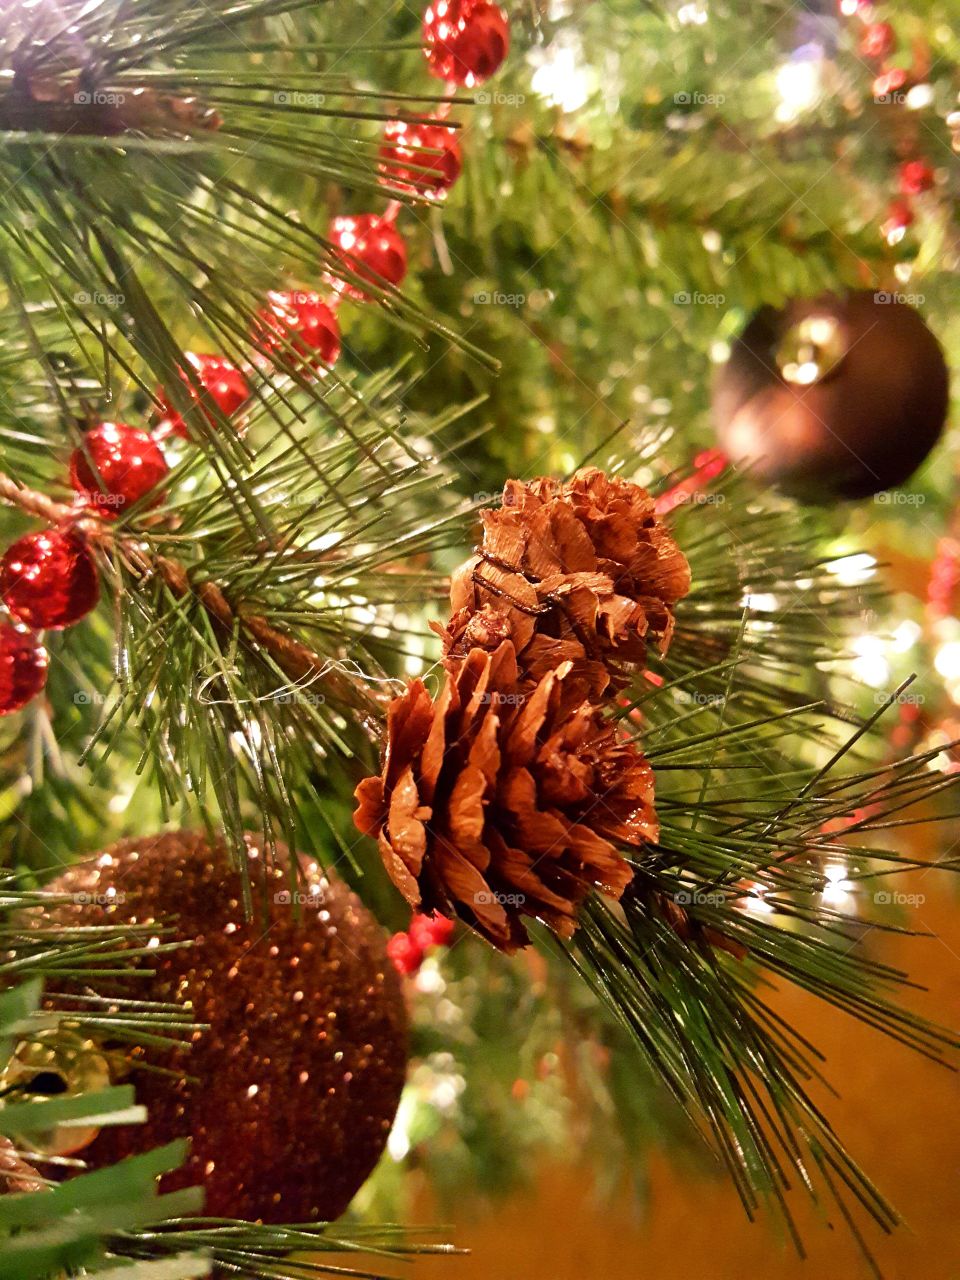 I think these little pinecones make a nice addition to our Christmas tree.